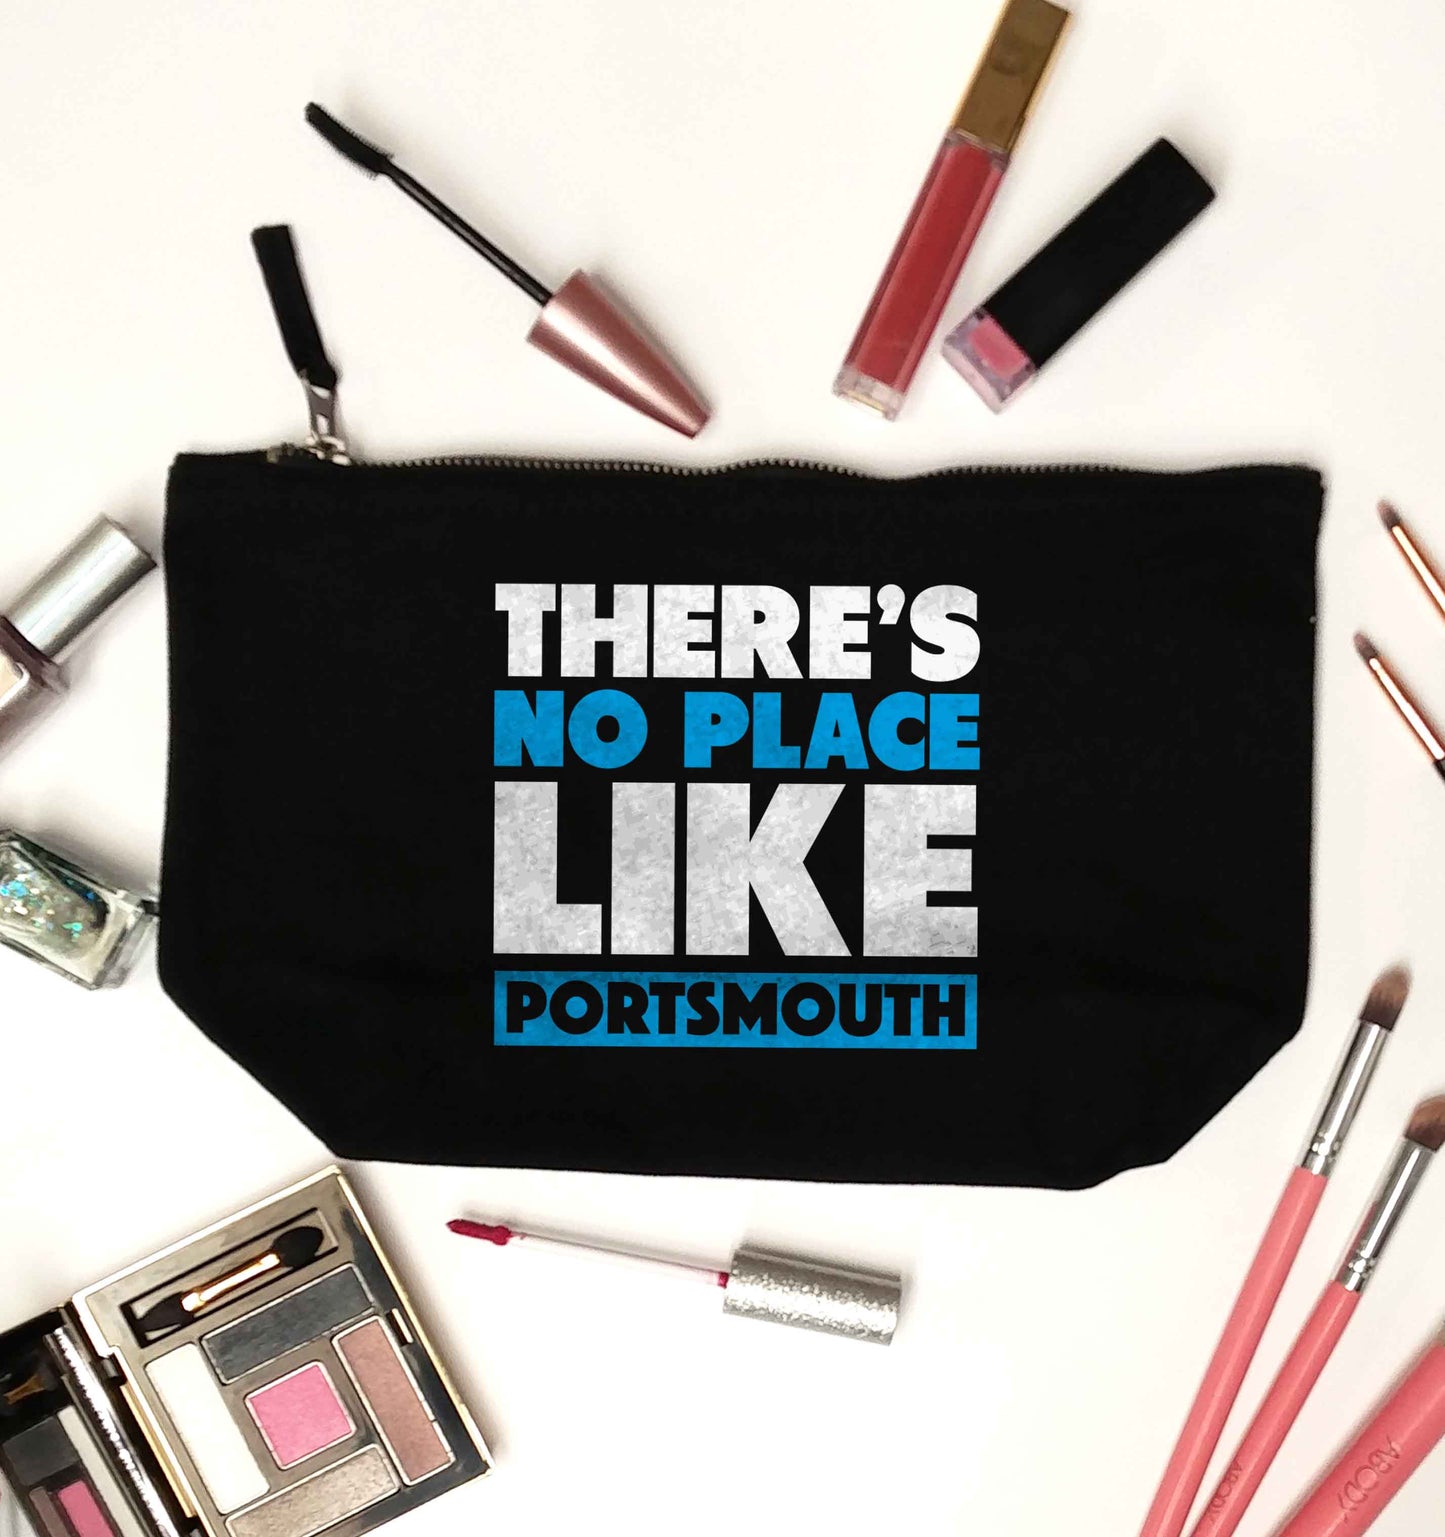 There's no place like Porstmouth black makeup bag